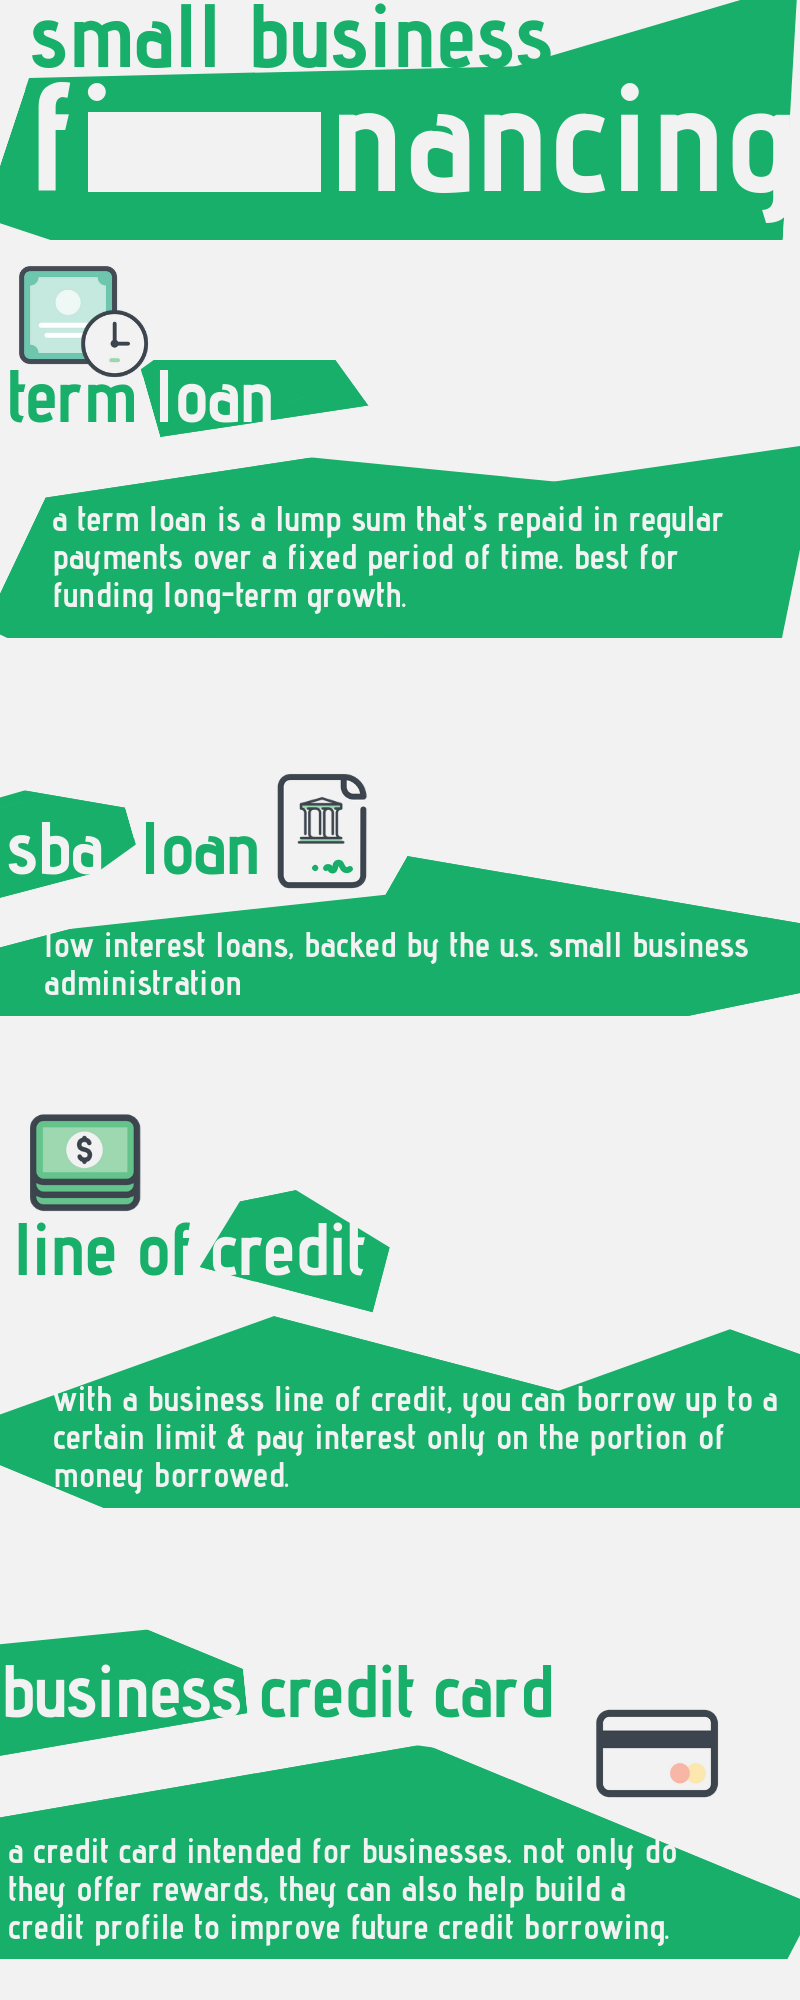 Small business financing